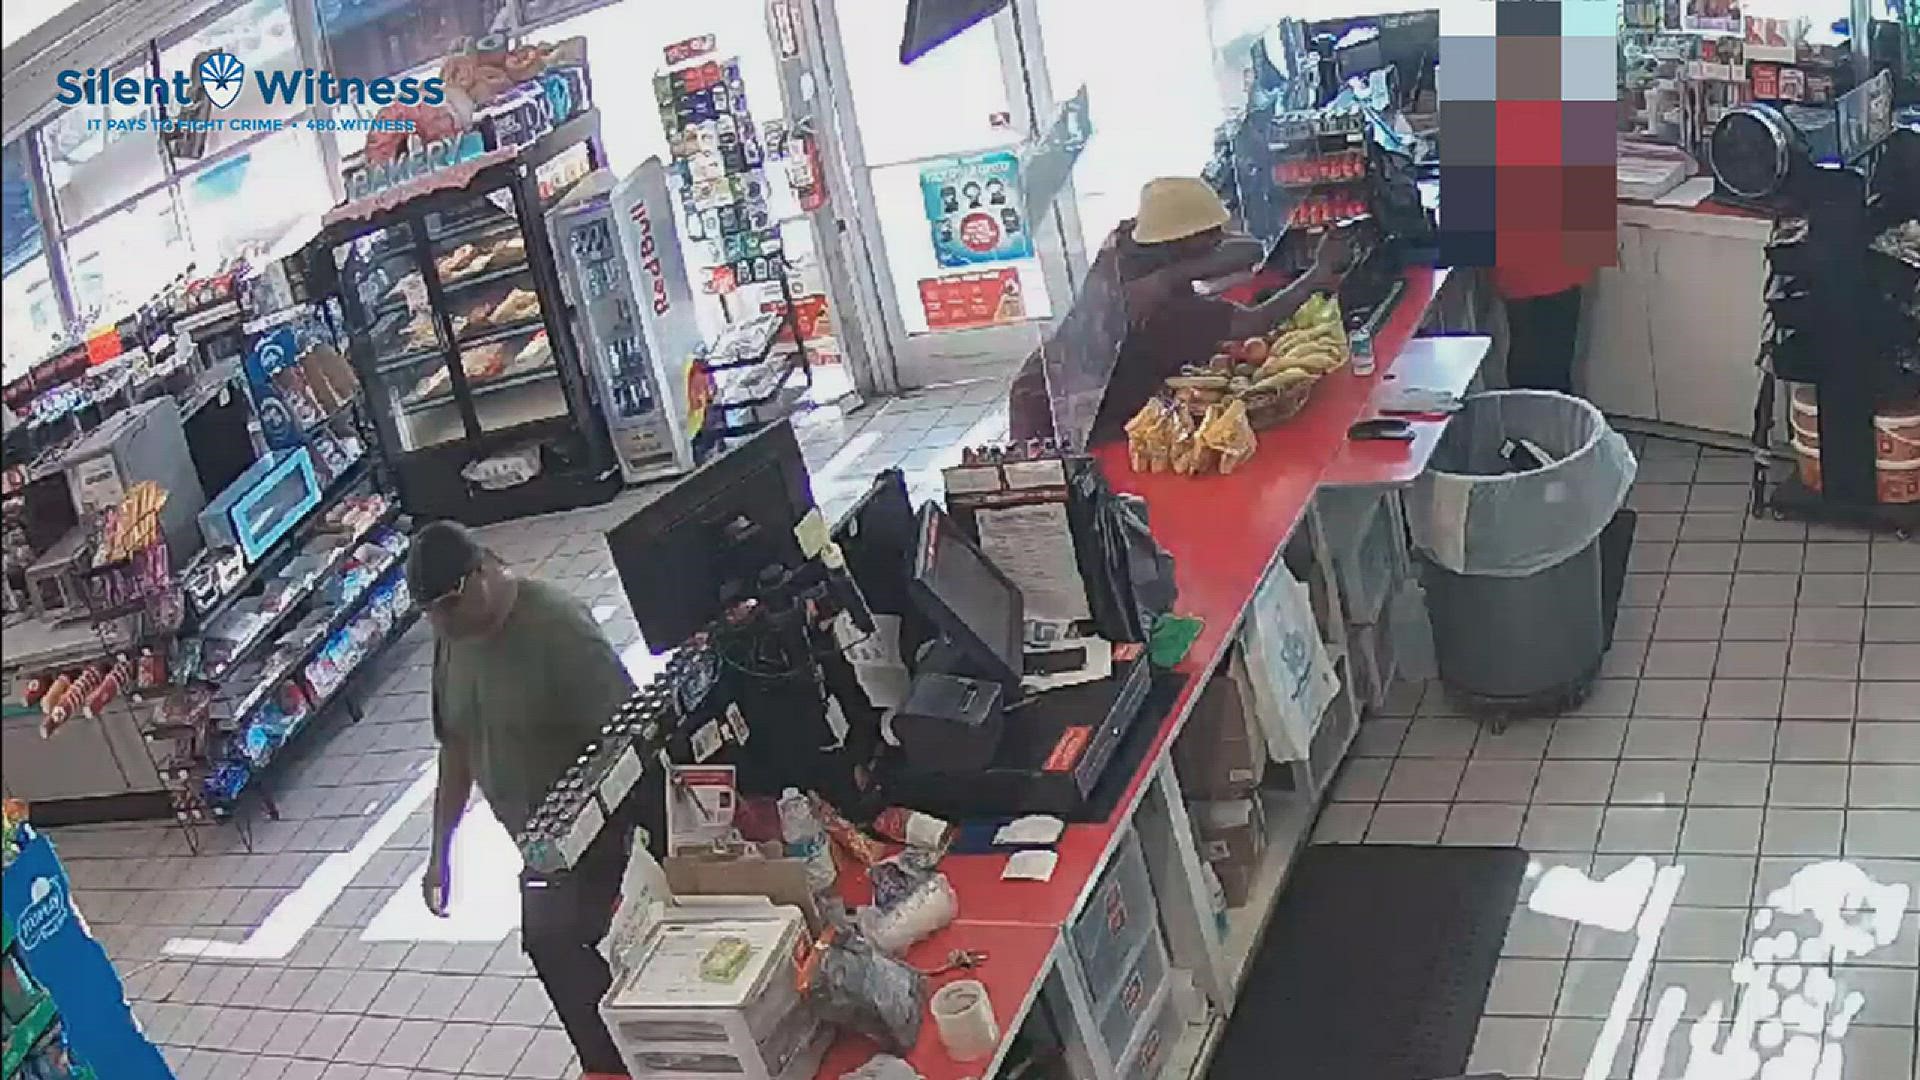 Police are searching for two men caught on camera robbing a convenience store at gunpoint.